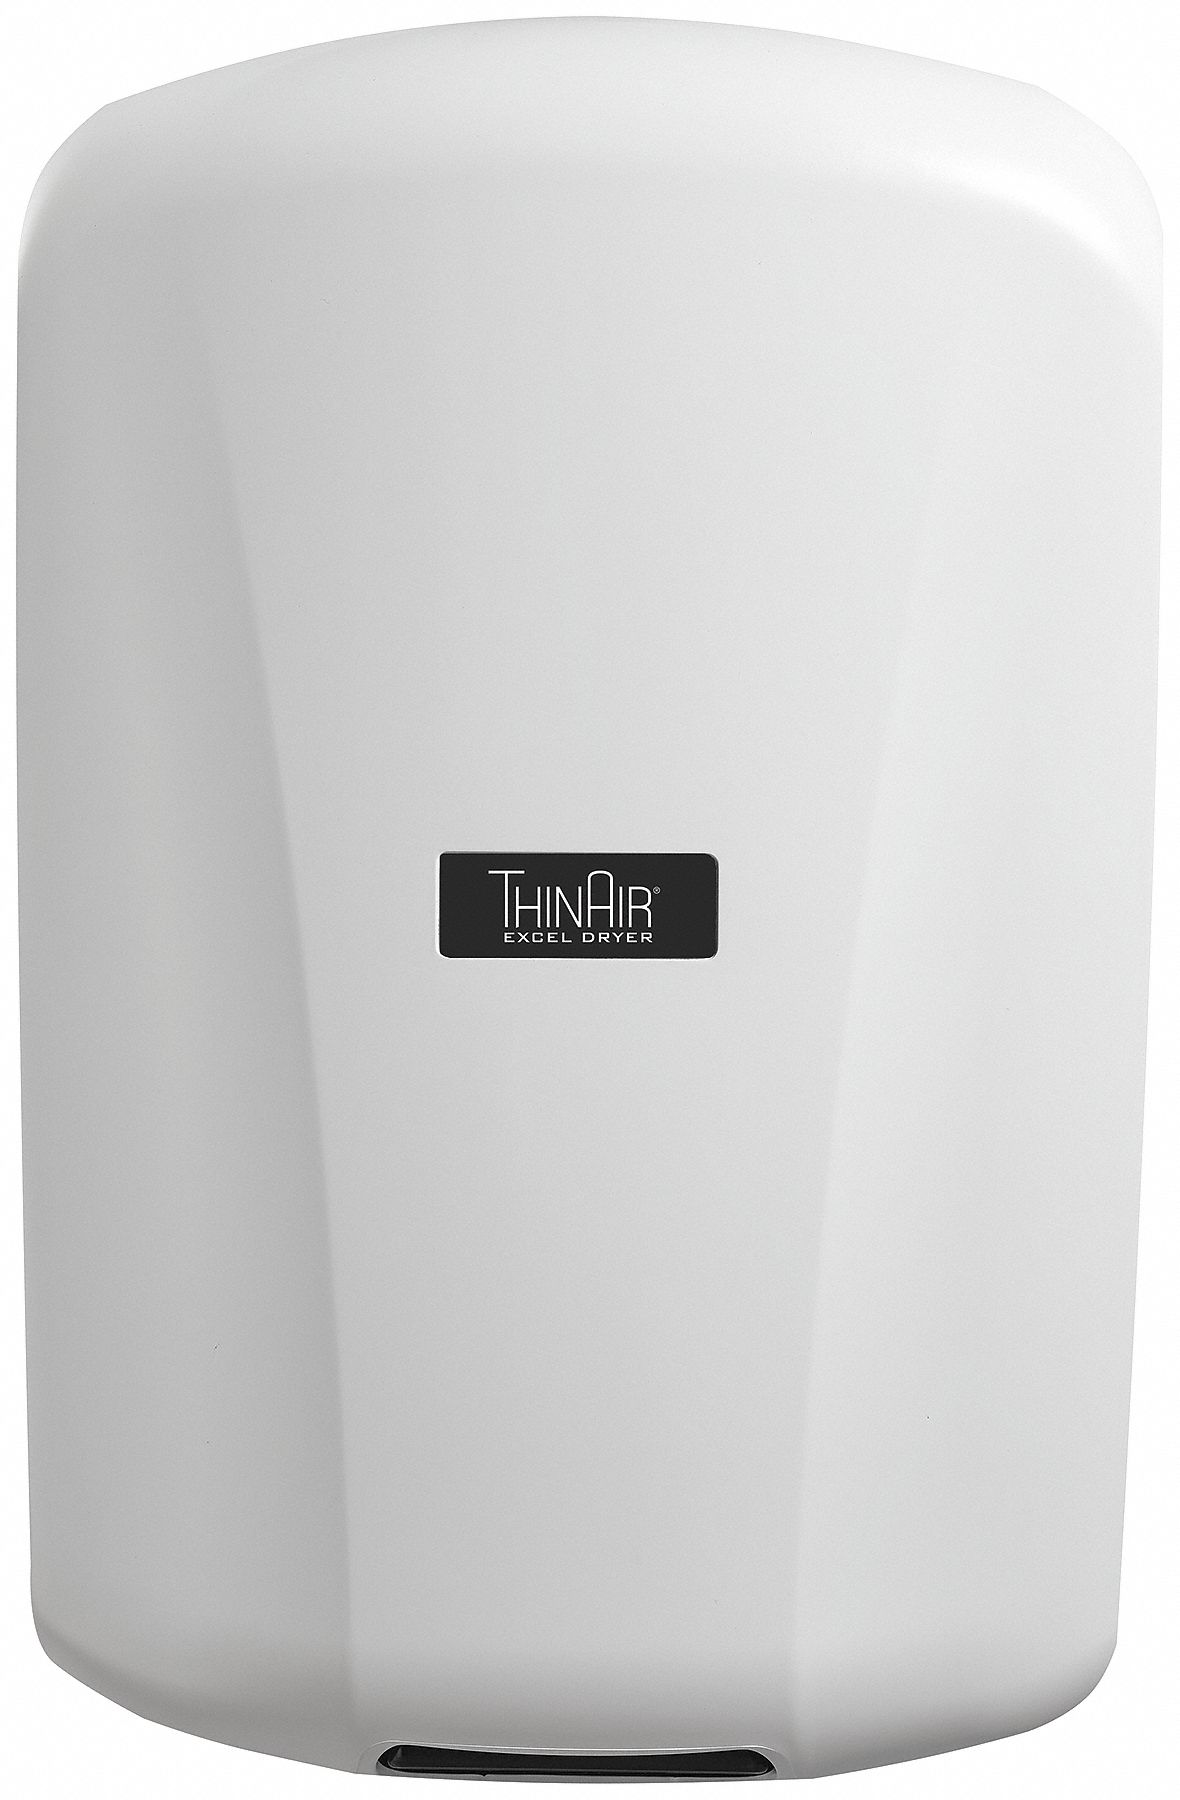 Hand Dryer: Integral, ABS Plastic, Auto, White, 14 sec Dry Time, 3.6/4 Amps, 208 to 277 Volt